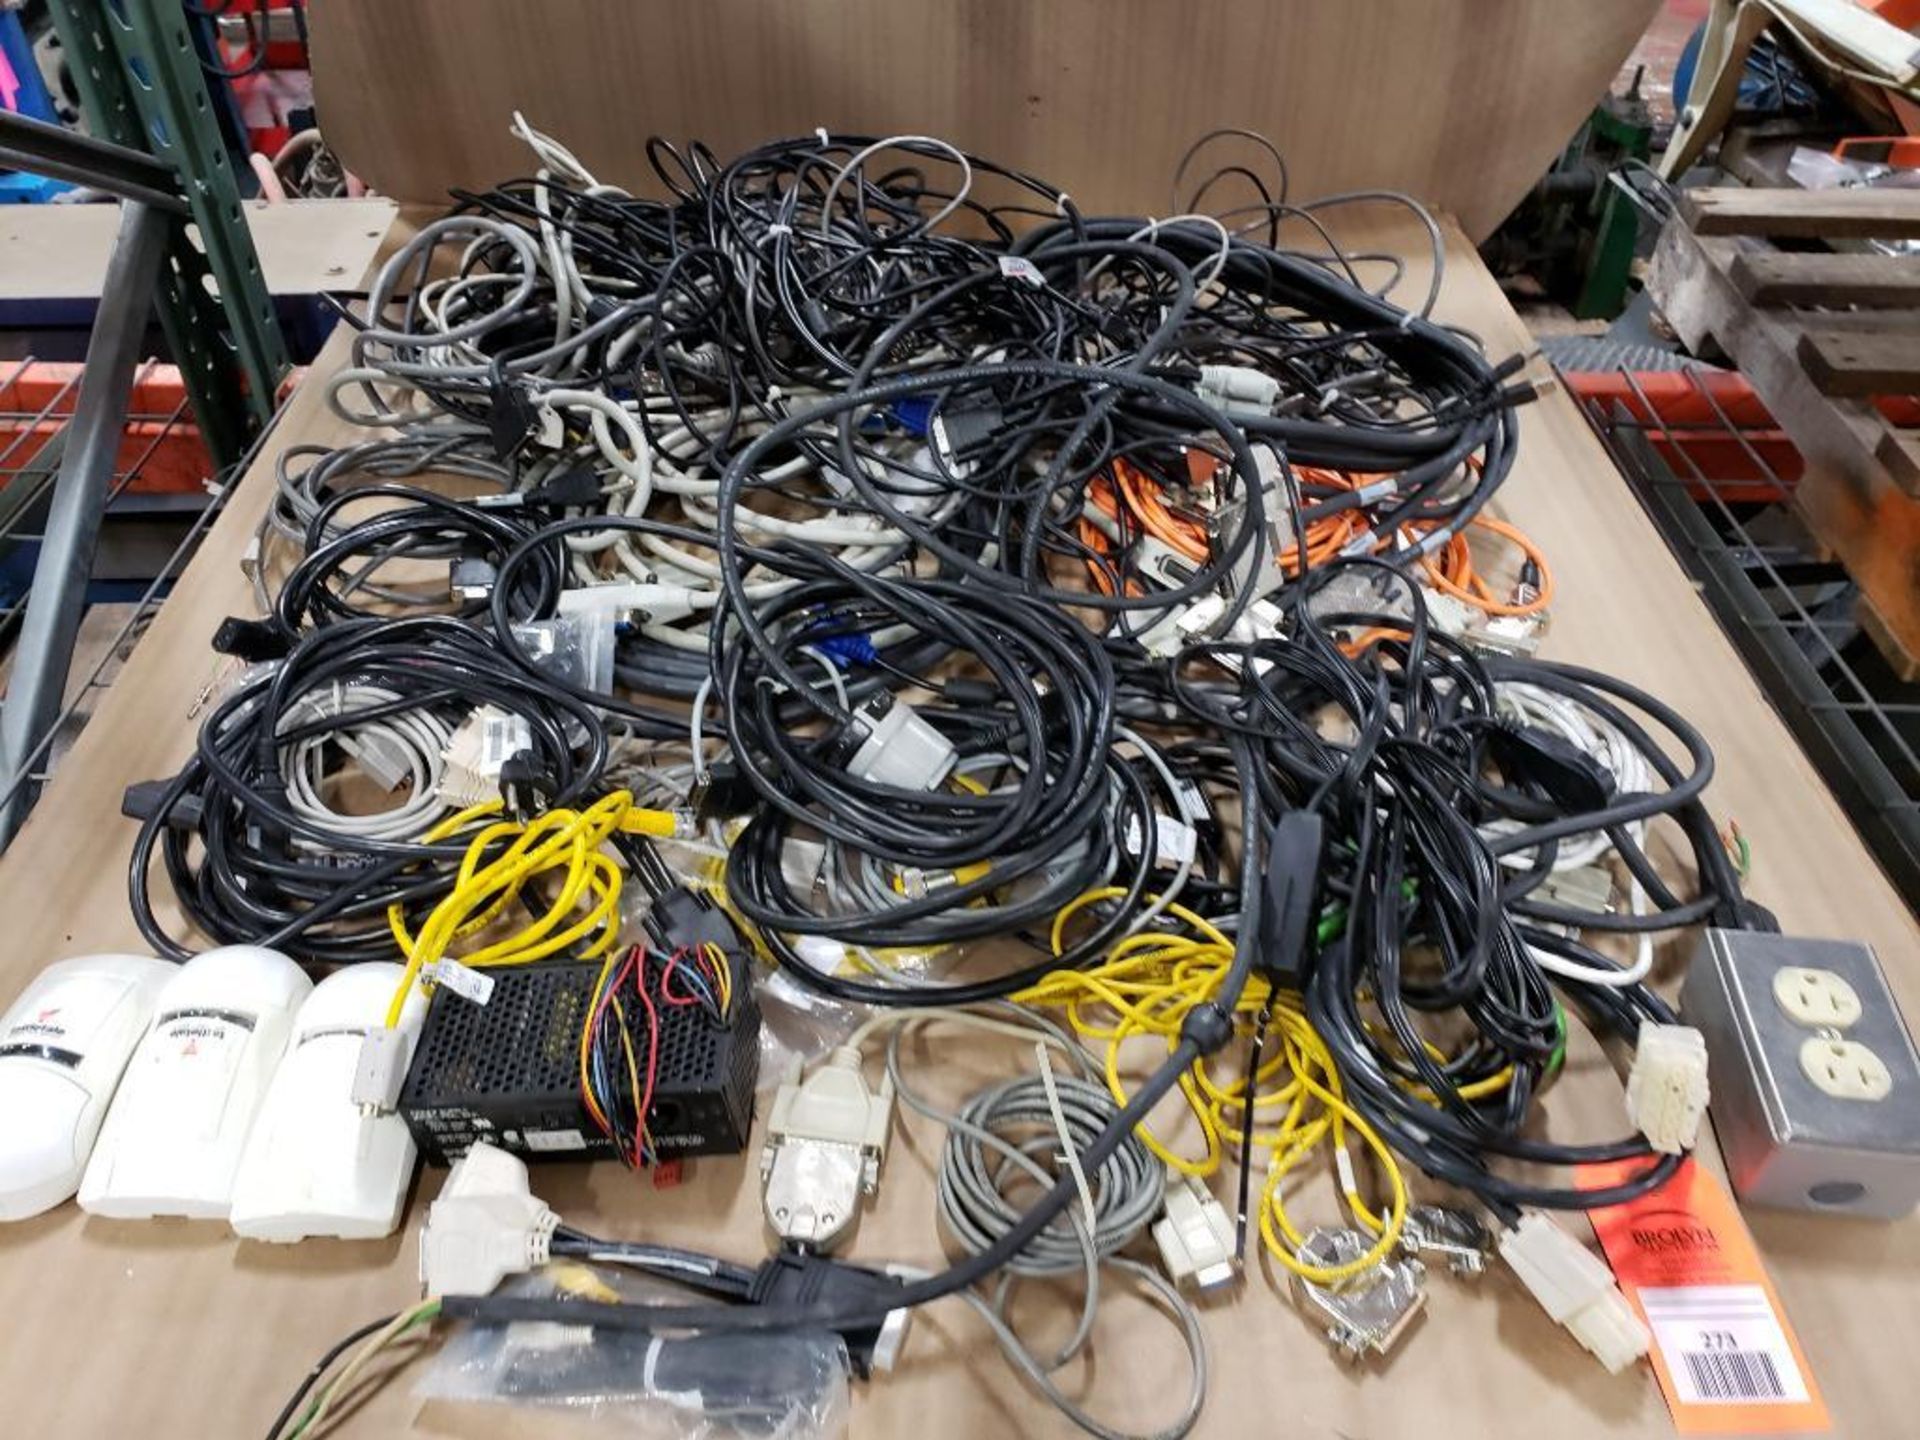 Large assortment of power and connection cordsets.